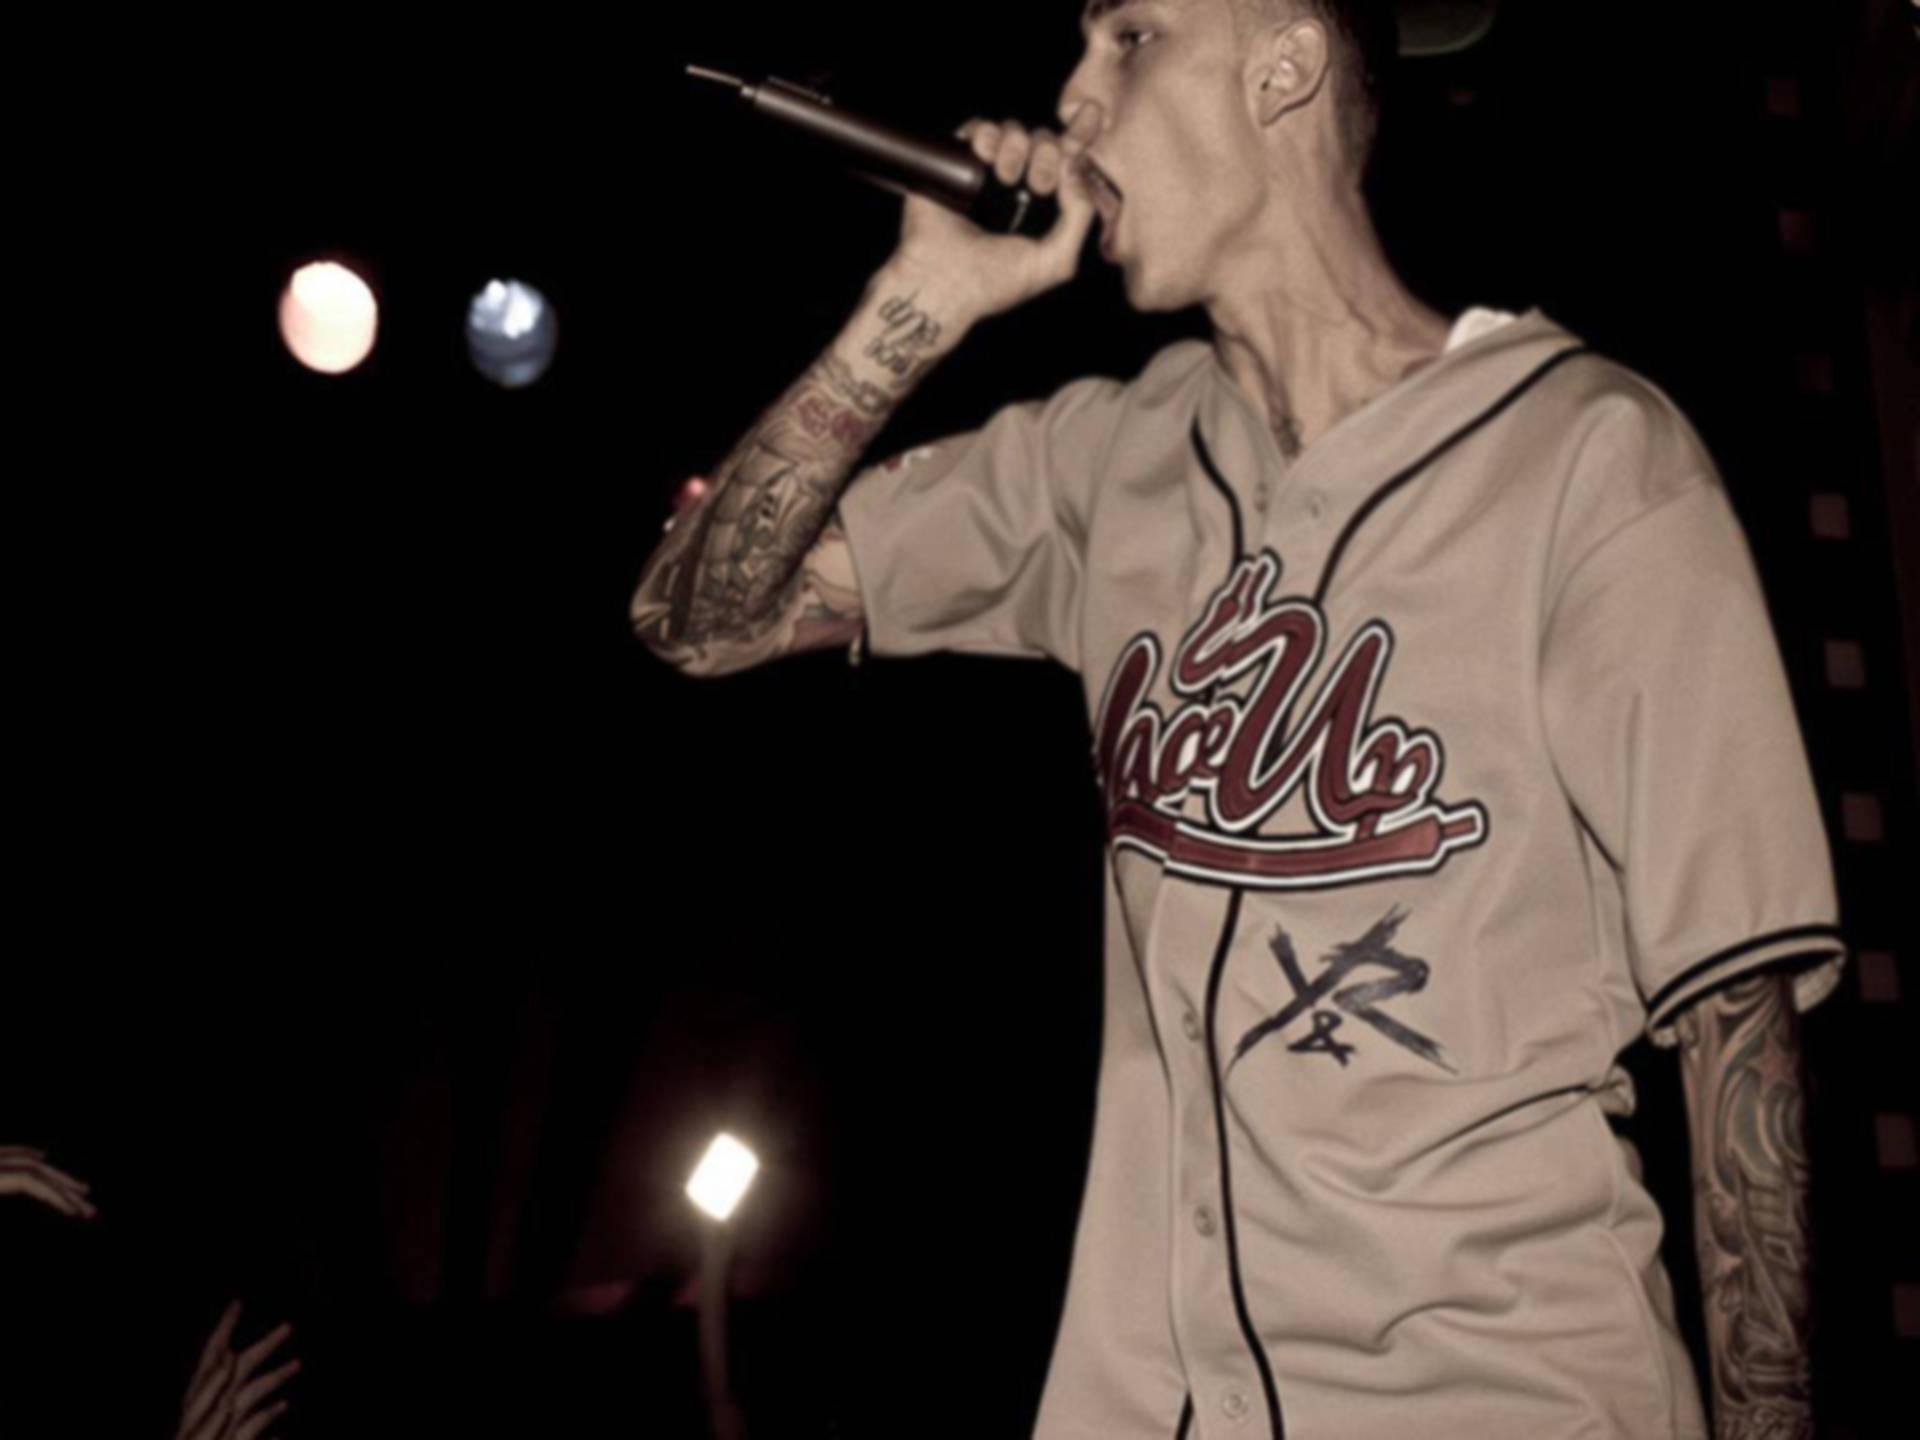 Mgk Lace Up Jersey Background